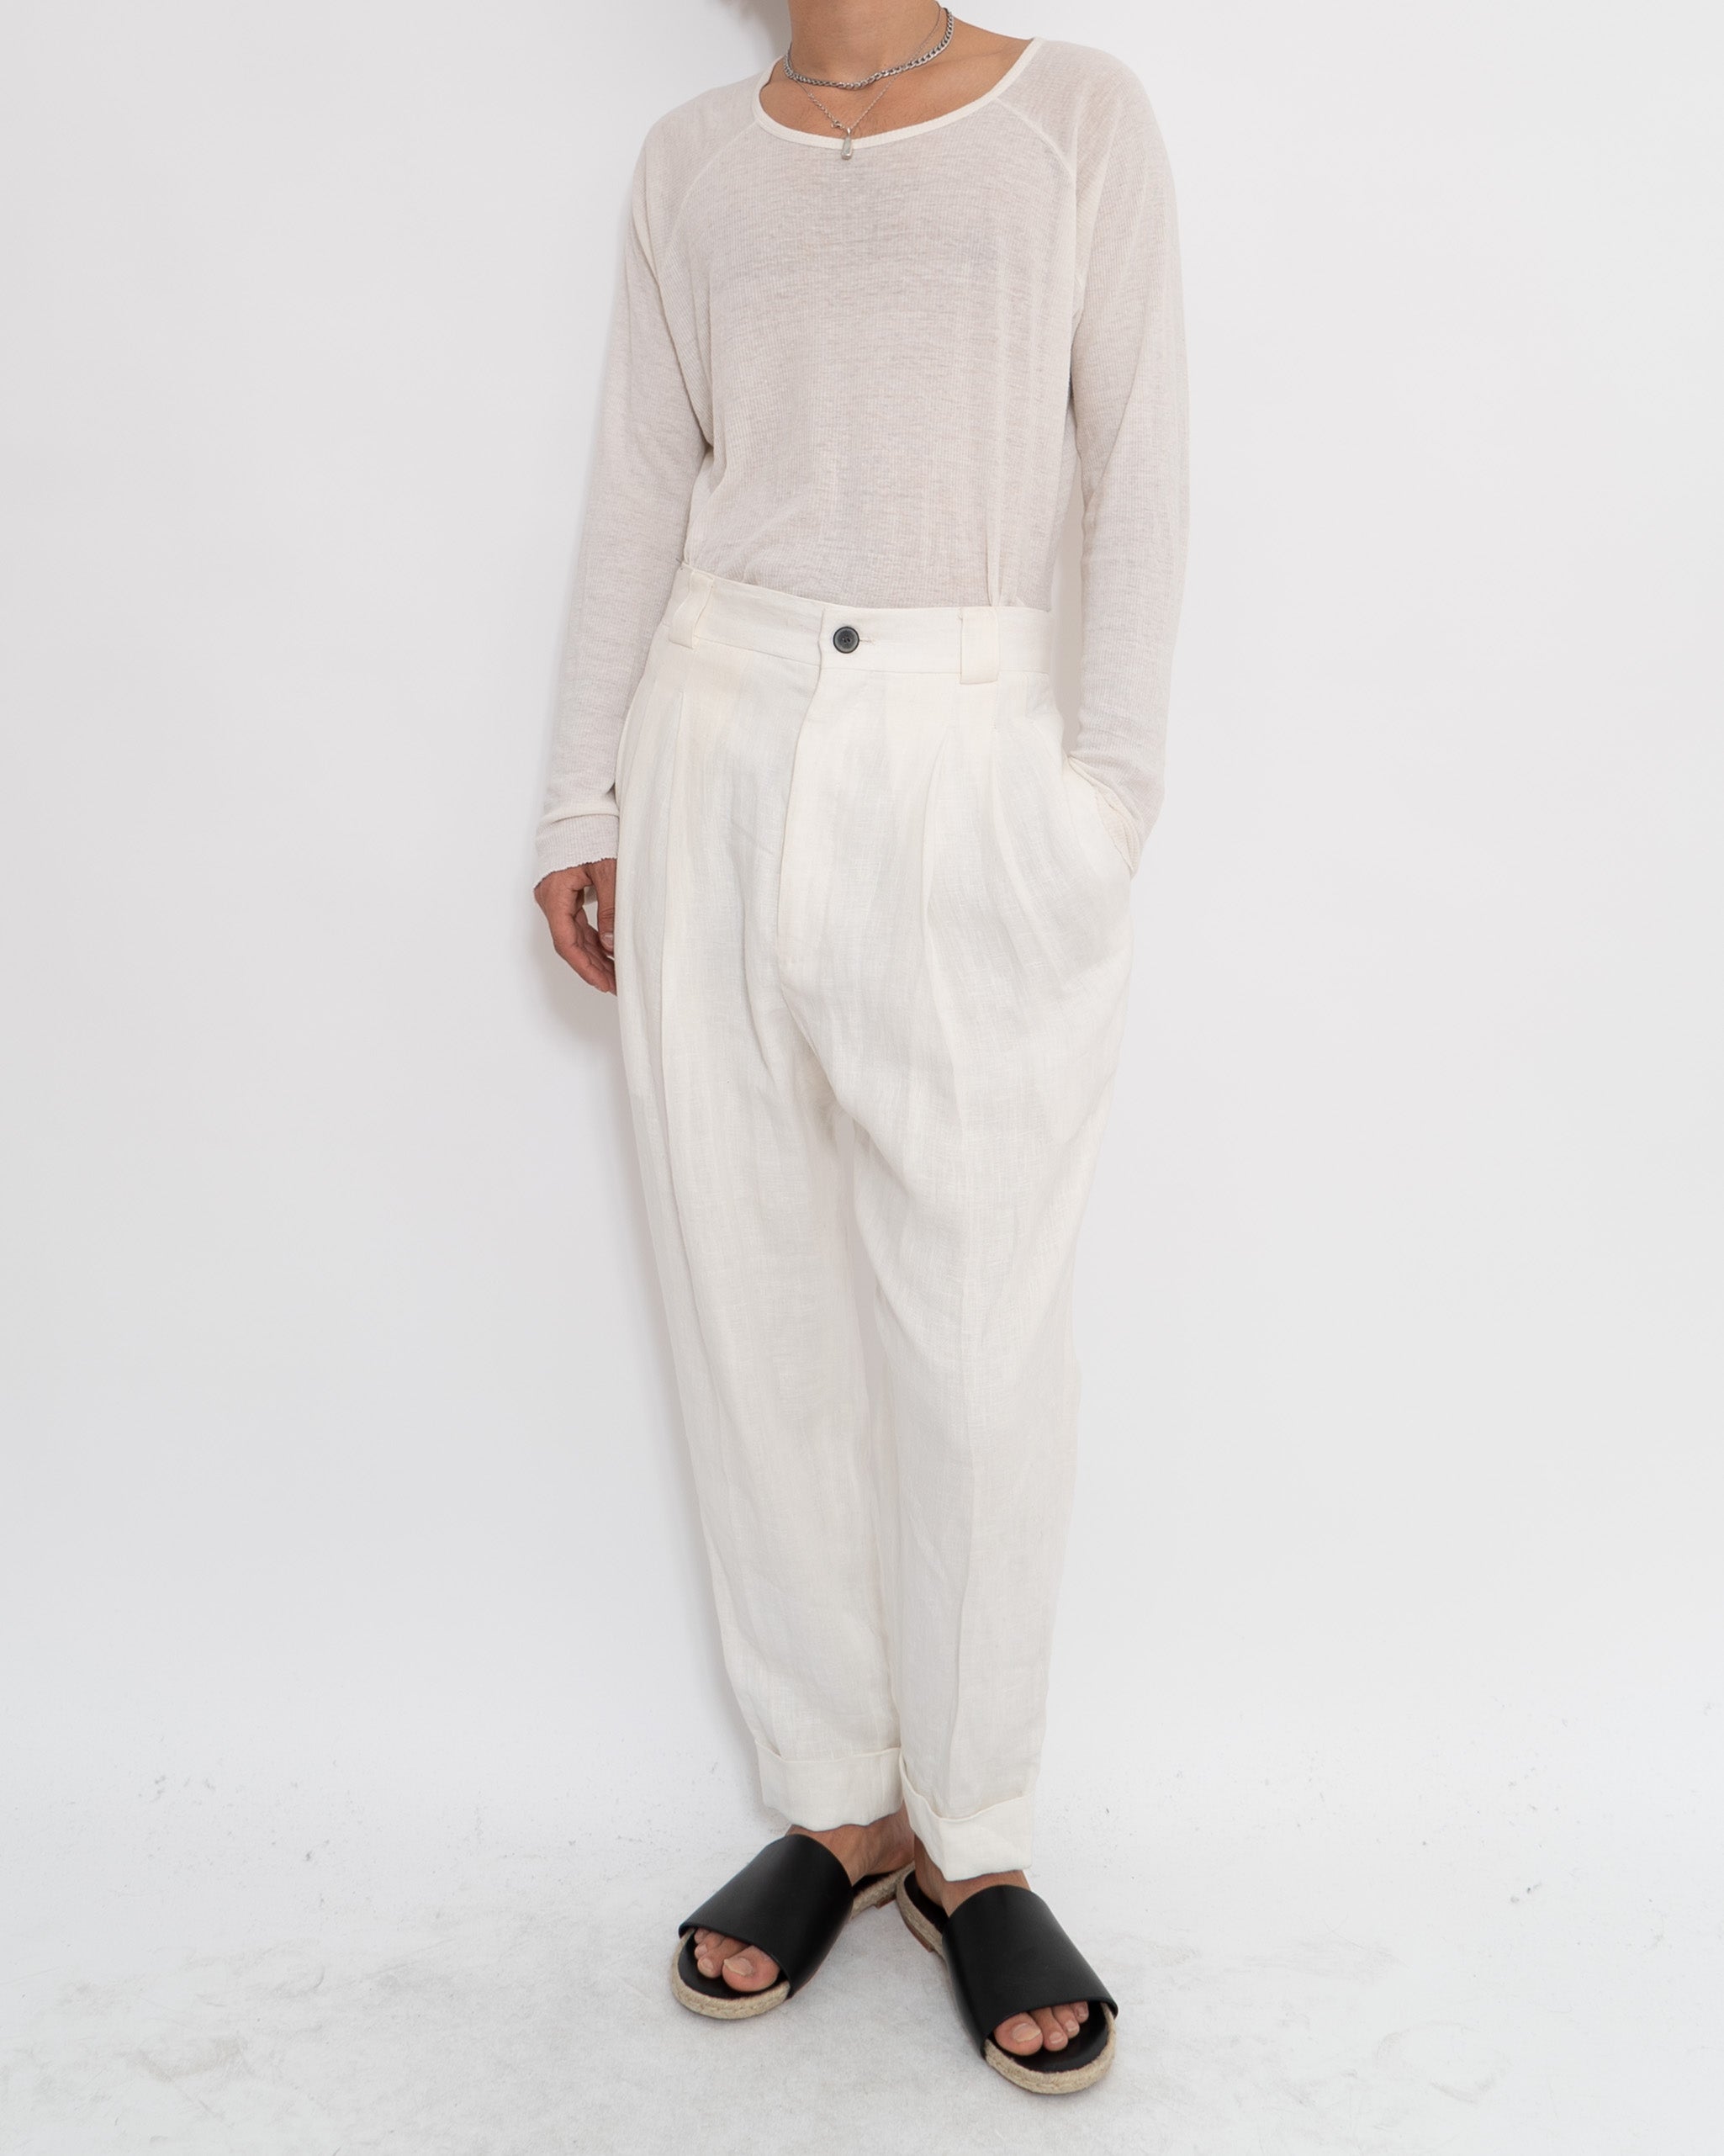 SS17 Agrippina Ivory Trousers Sample